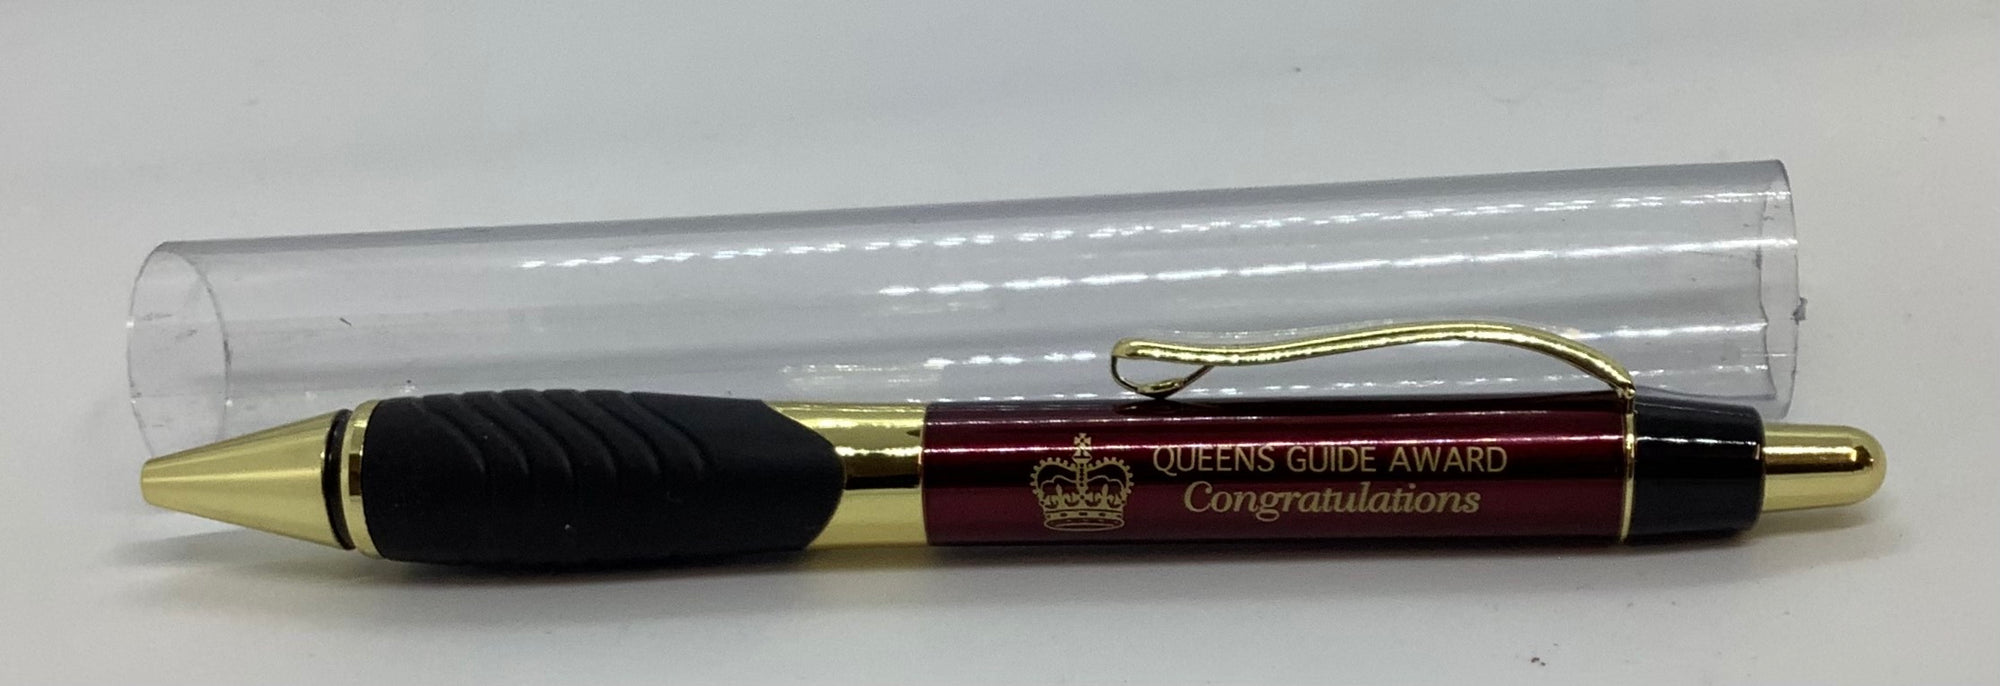 a maroon, black and gold pen with queens guide award congratulations written on it